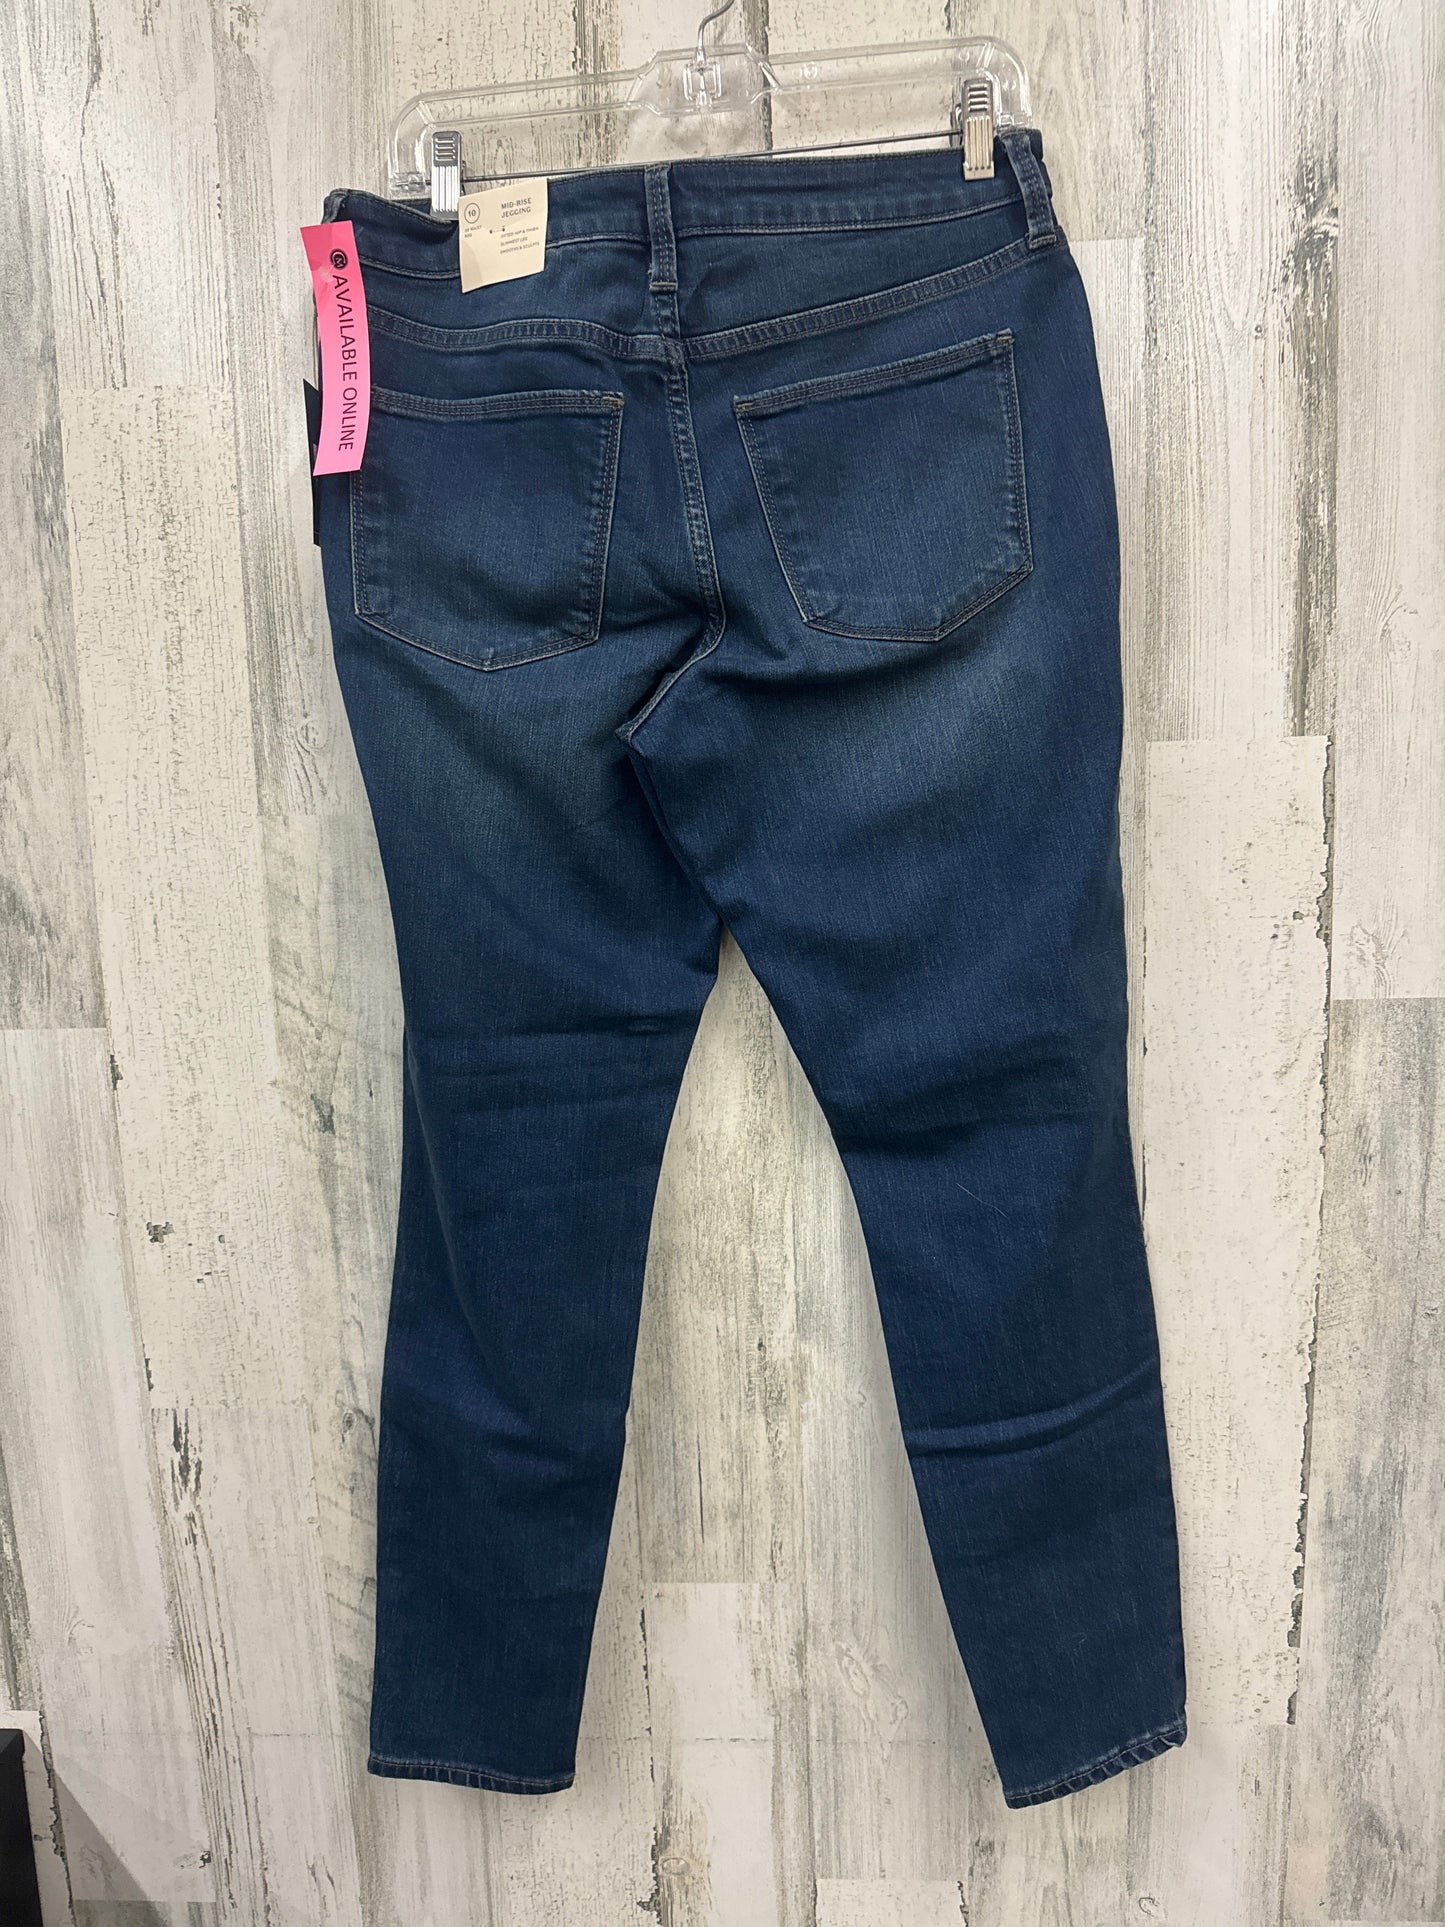 Jeans Skinny By Universal Thread  Size: 10